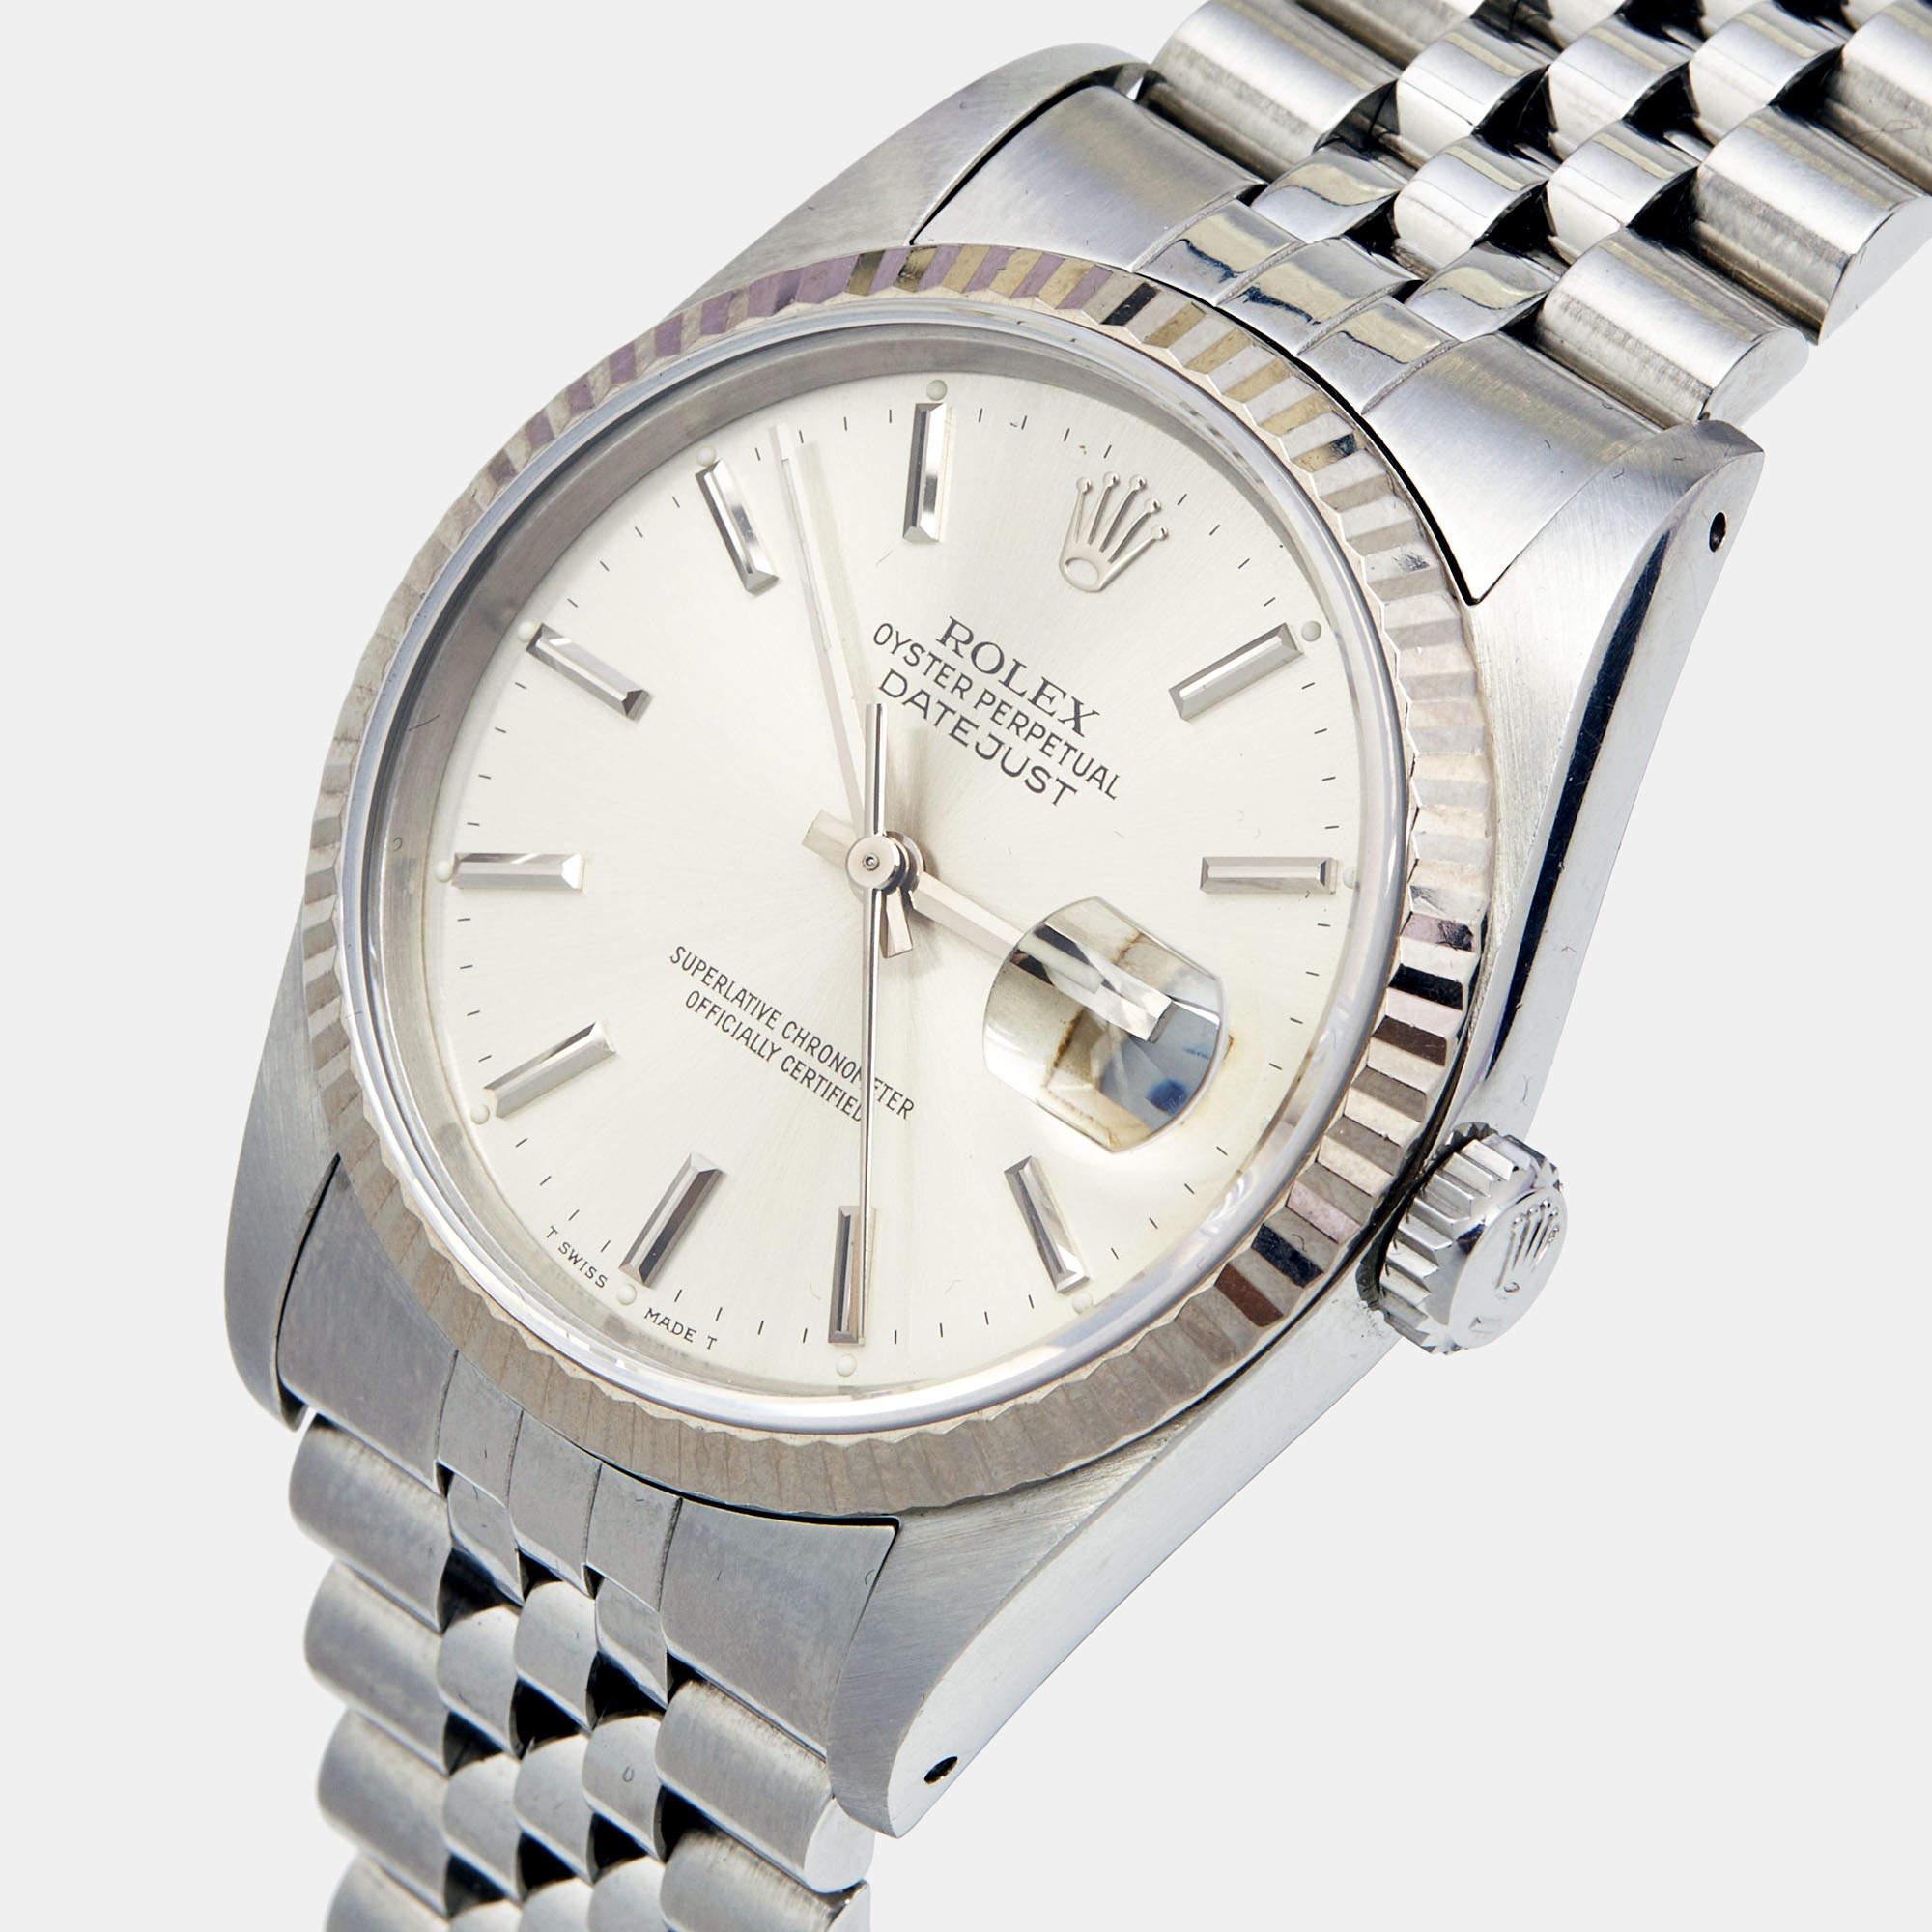 Rolex Silver 18k White Gold Stainless Steel Datejust 16234 Men's Wristwatch 36 m For Sale 3